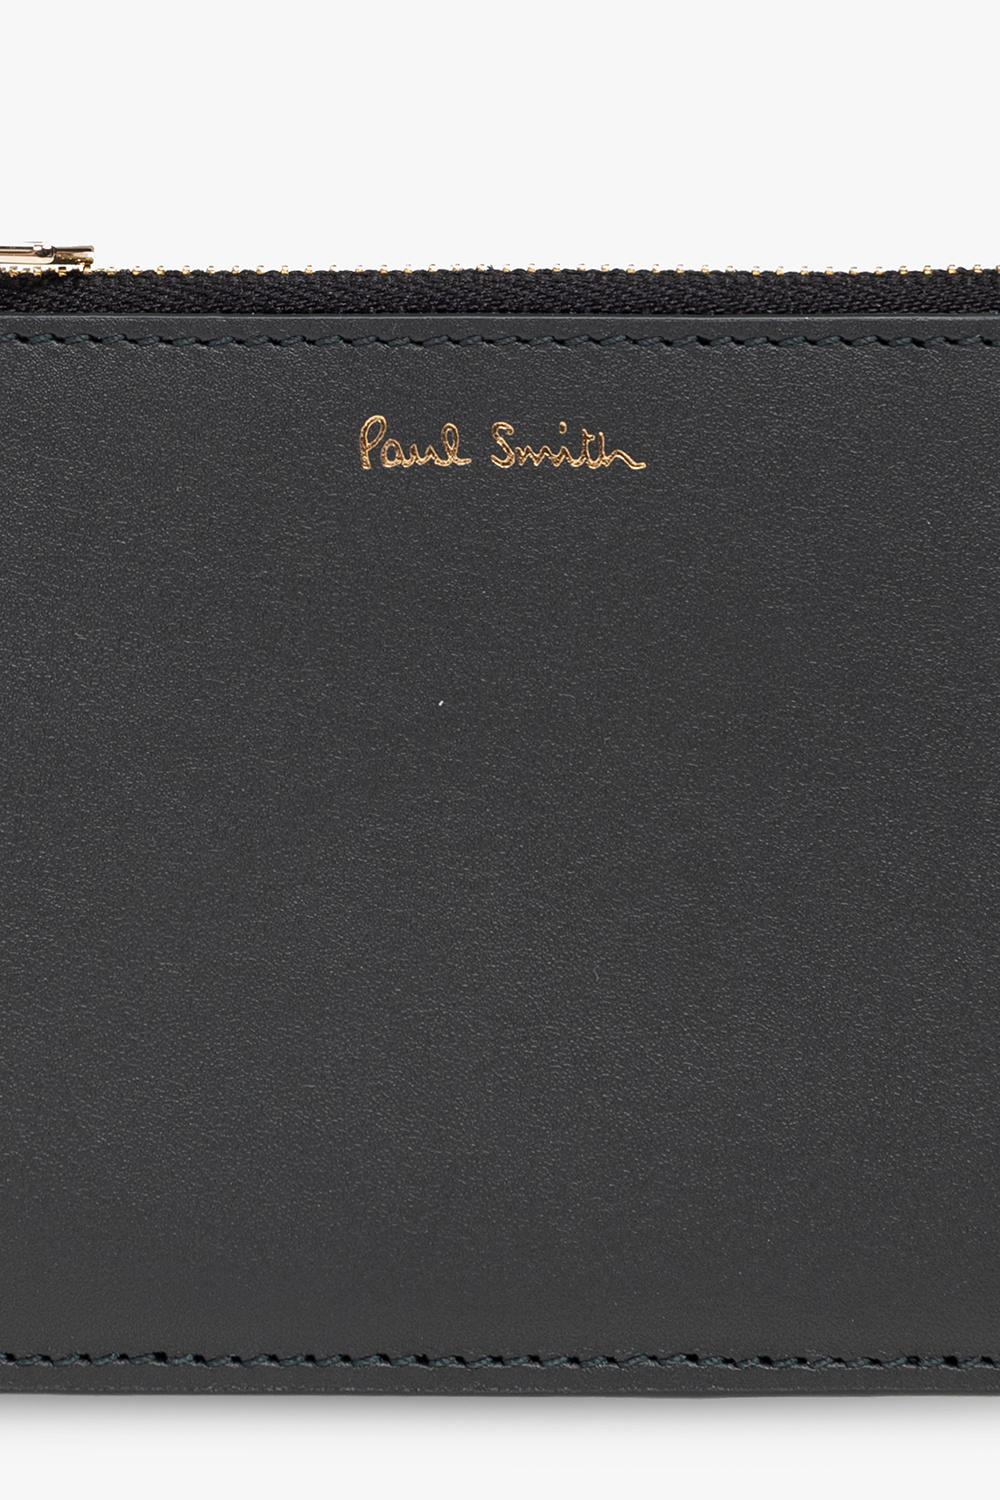 Paul Smith A STEP AHEAD IN STYLISH SHOES